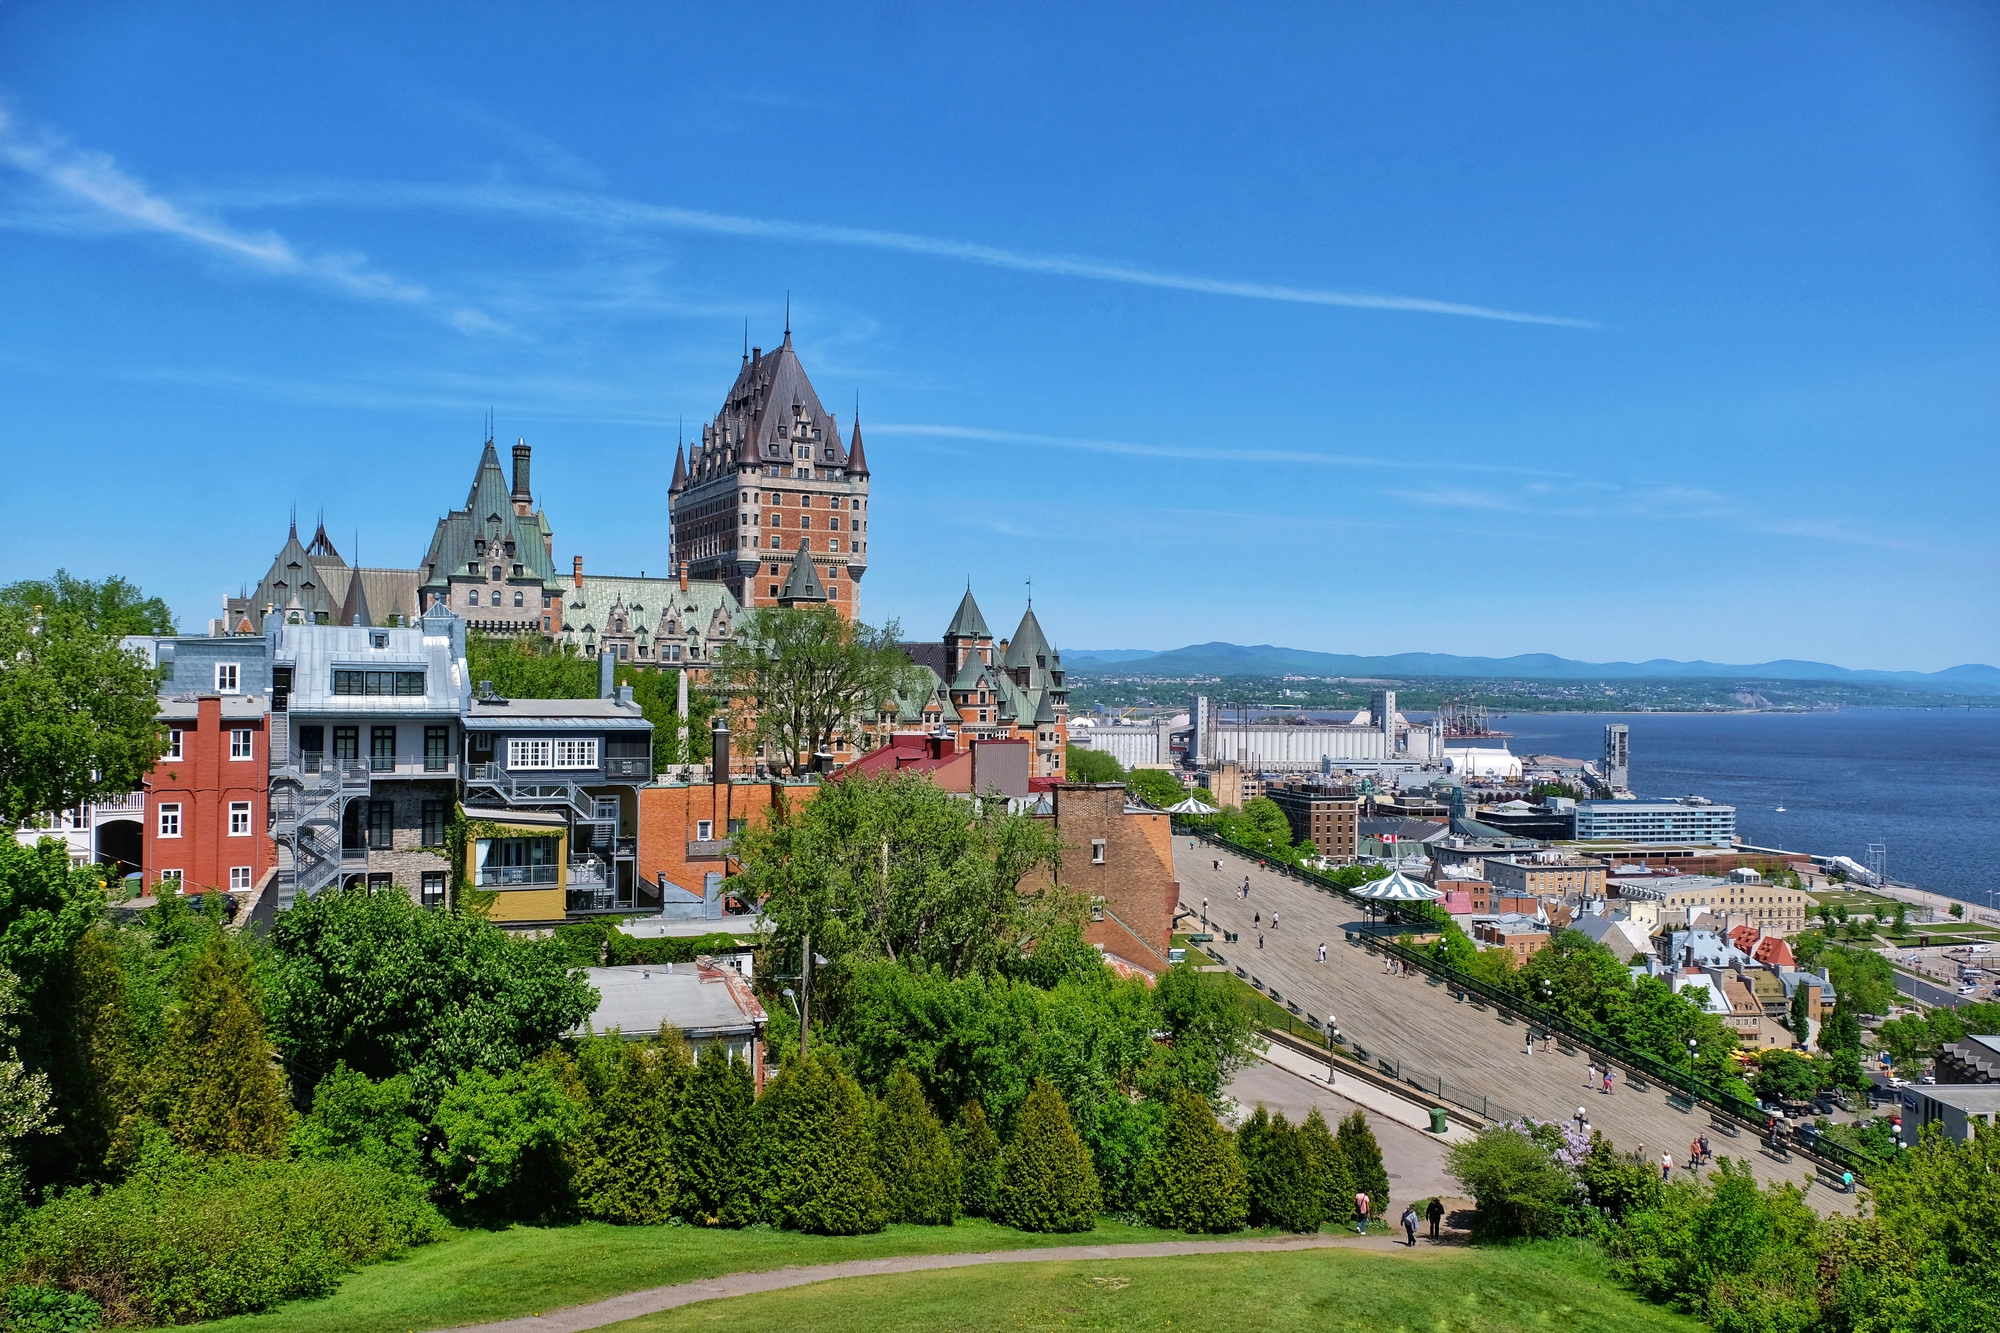 Amazing View of Quebec City skyline with Saint Lawrence river in Canada